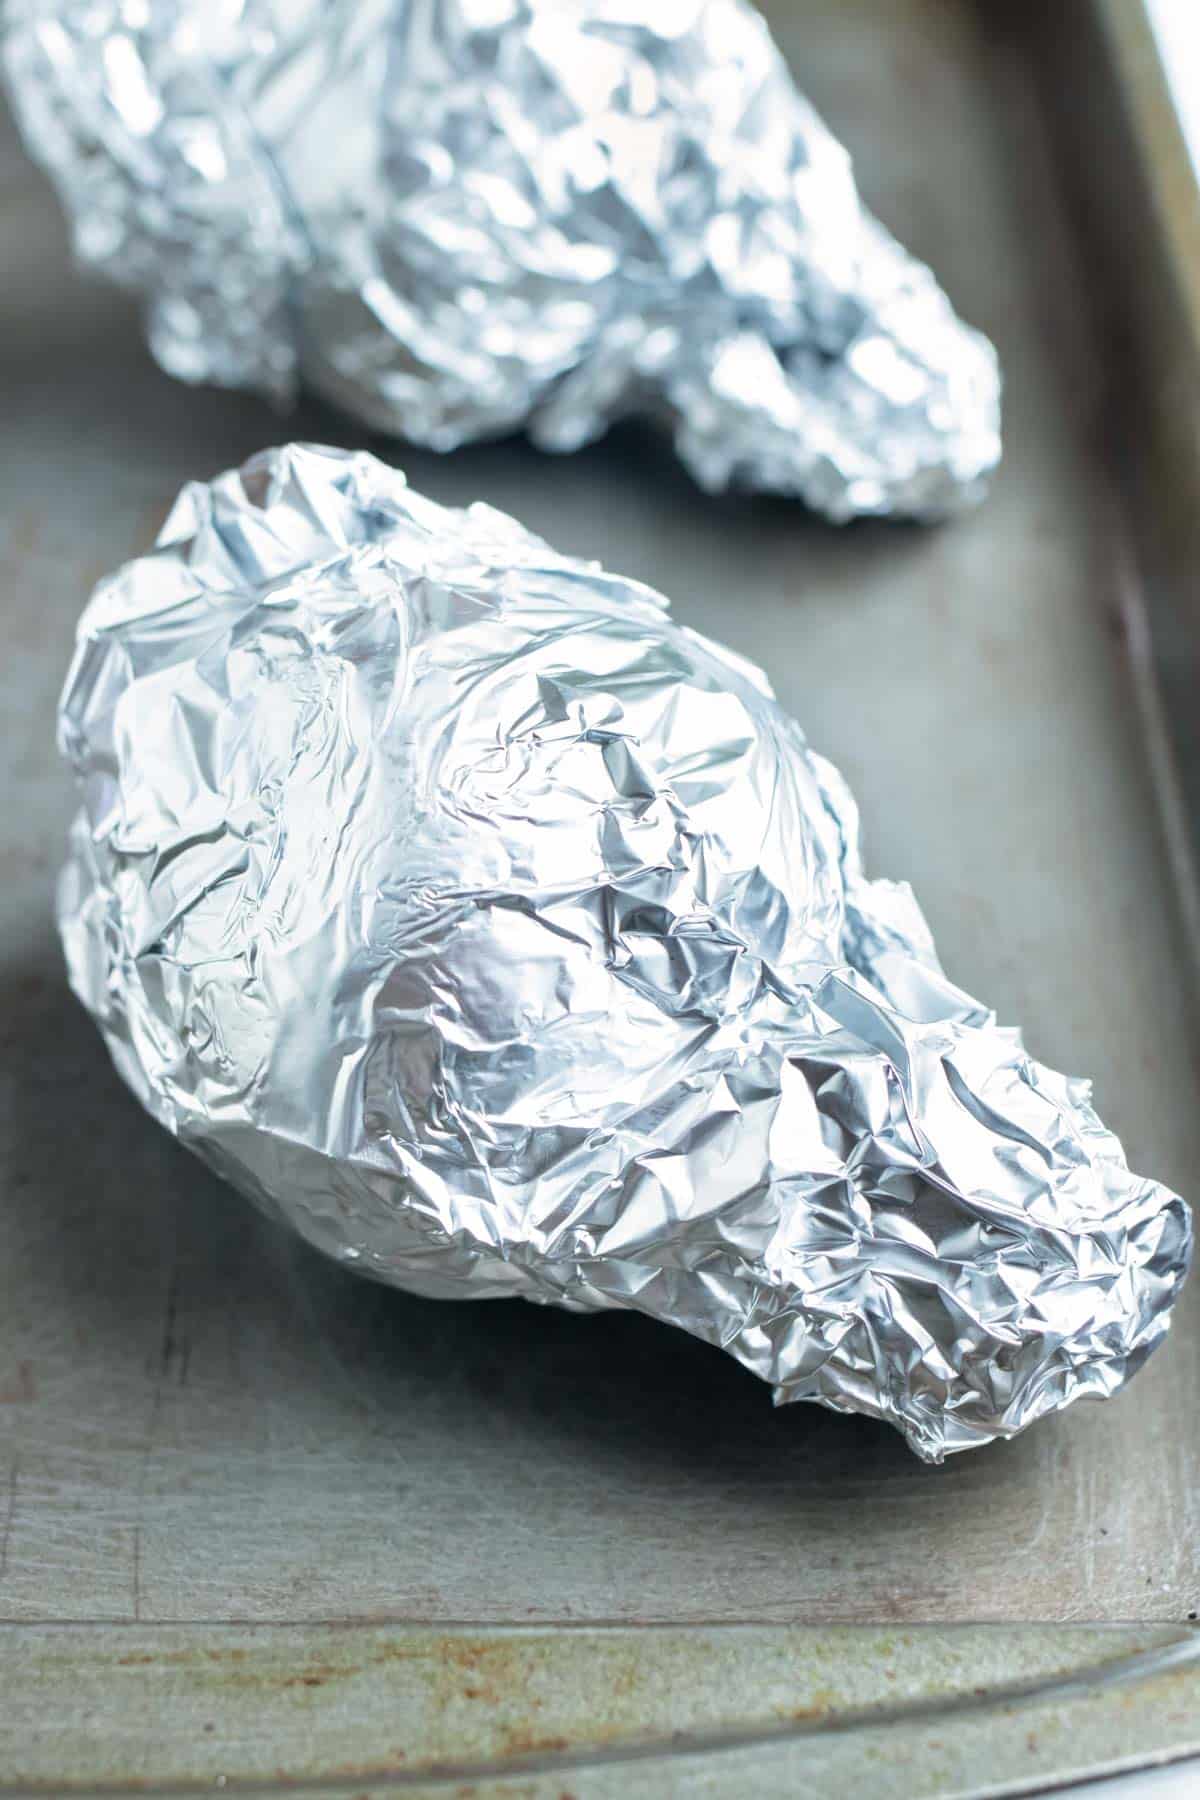 Beets are wrapped in foil and roasted in the oven on a baking sheet.